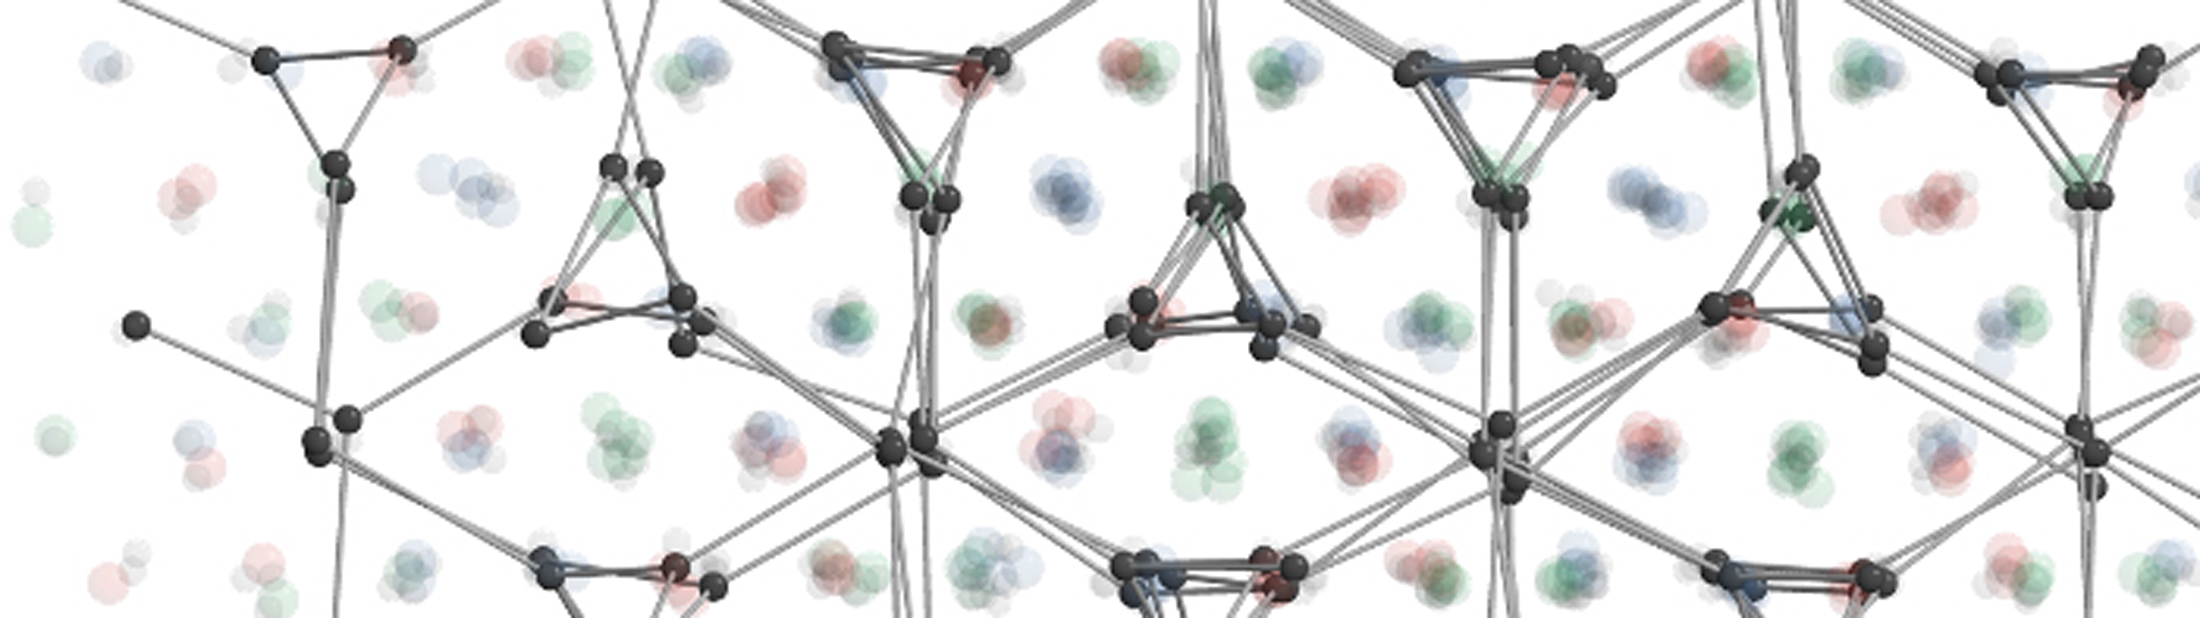 The structural illustration shows the triple-double-gyroid, a new crystal structure discovered by the researchers at Northwestern University, the University of Michigan and Argonne National Laboratory. It has never been found in nature or synthesized before. The translucent balls in red, green and blue show the positions of large nanoparticles. Each color represents a double-gyroid structure. The dark grey balls and sticks show the locations of the smaller, electron-like particles in one of three types of sites in which those particles appear. The formation of this new crystal structure is a result of the way electron-like nanoparticles control the number of neighbors around the larger nanoparticles. Credit: Sangmin Lee, Glotzer Group, University of Michigan